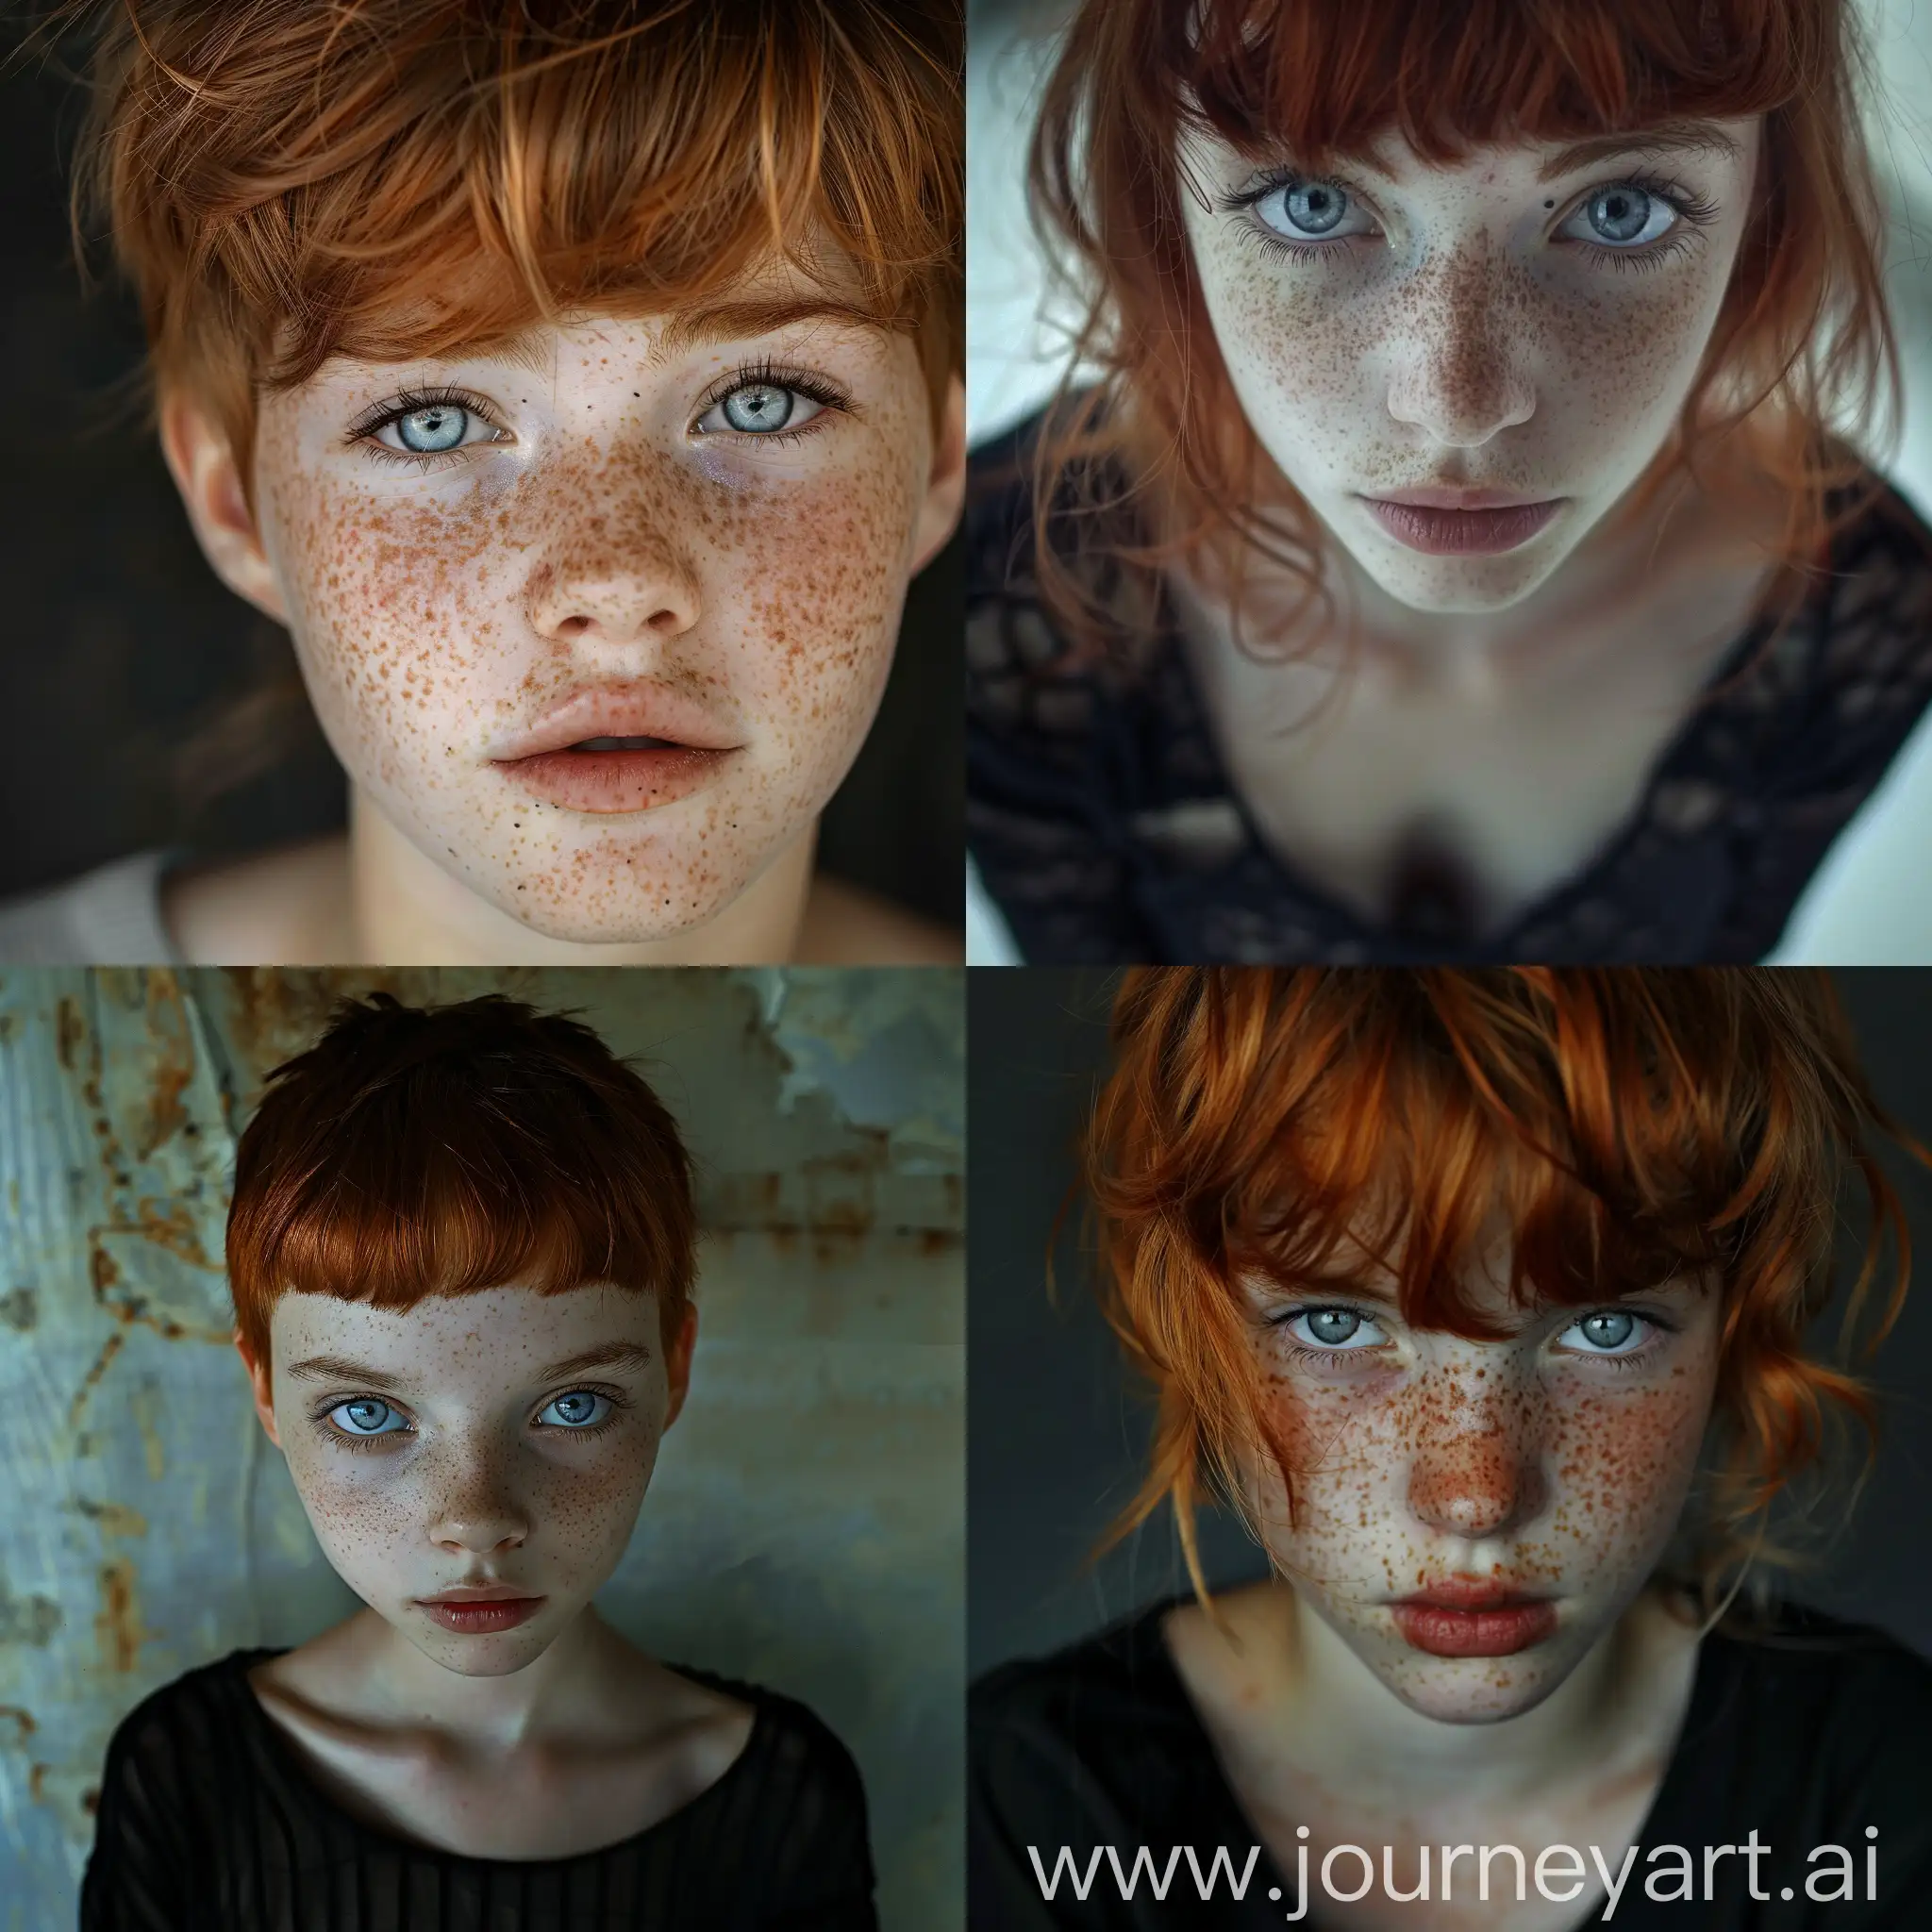 16 year old girl goth pixie red hair, freckles, icy blue eyes 